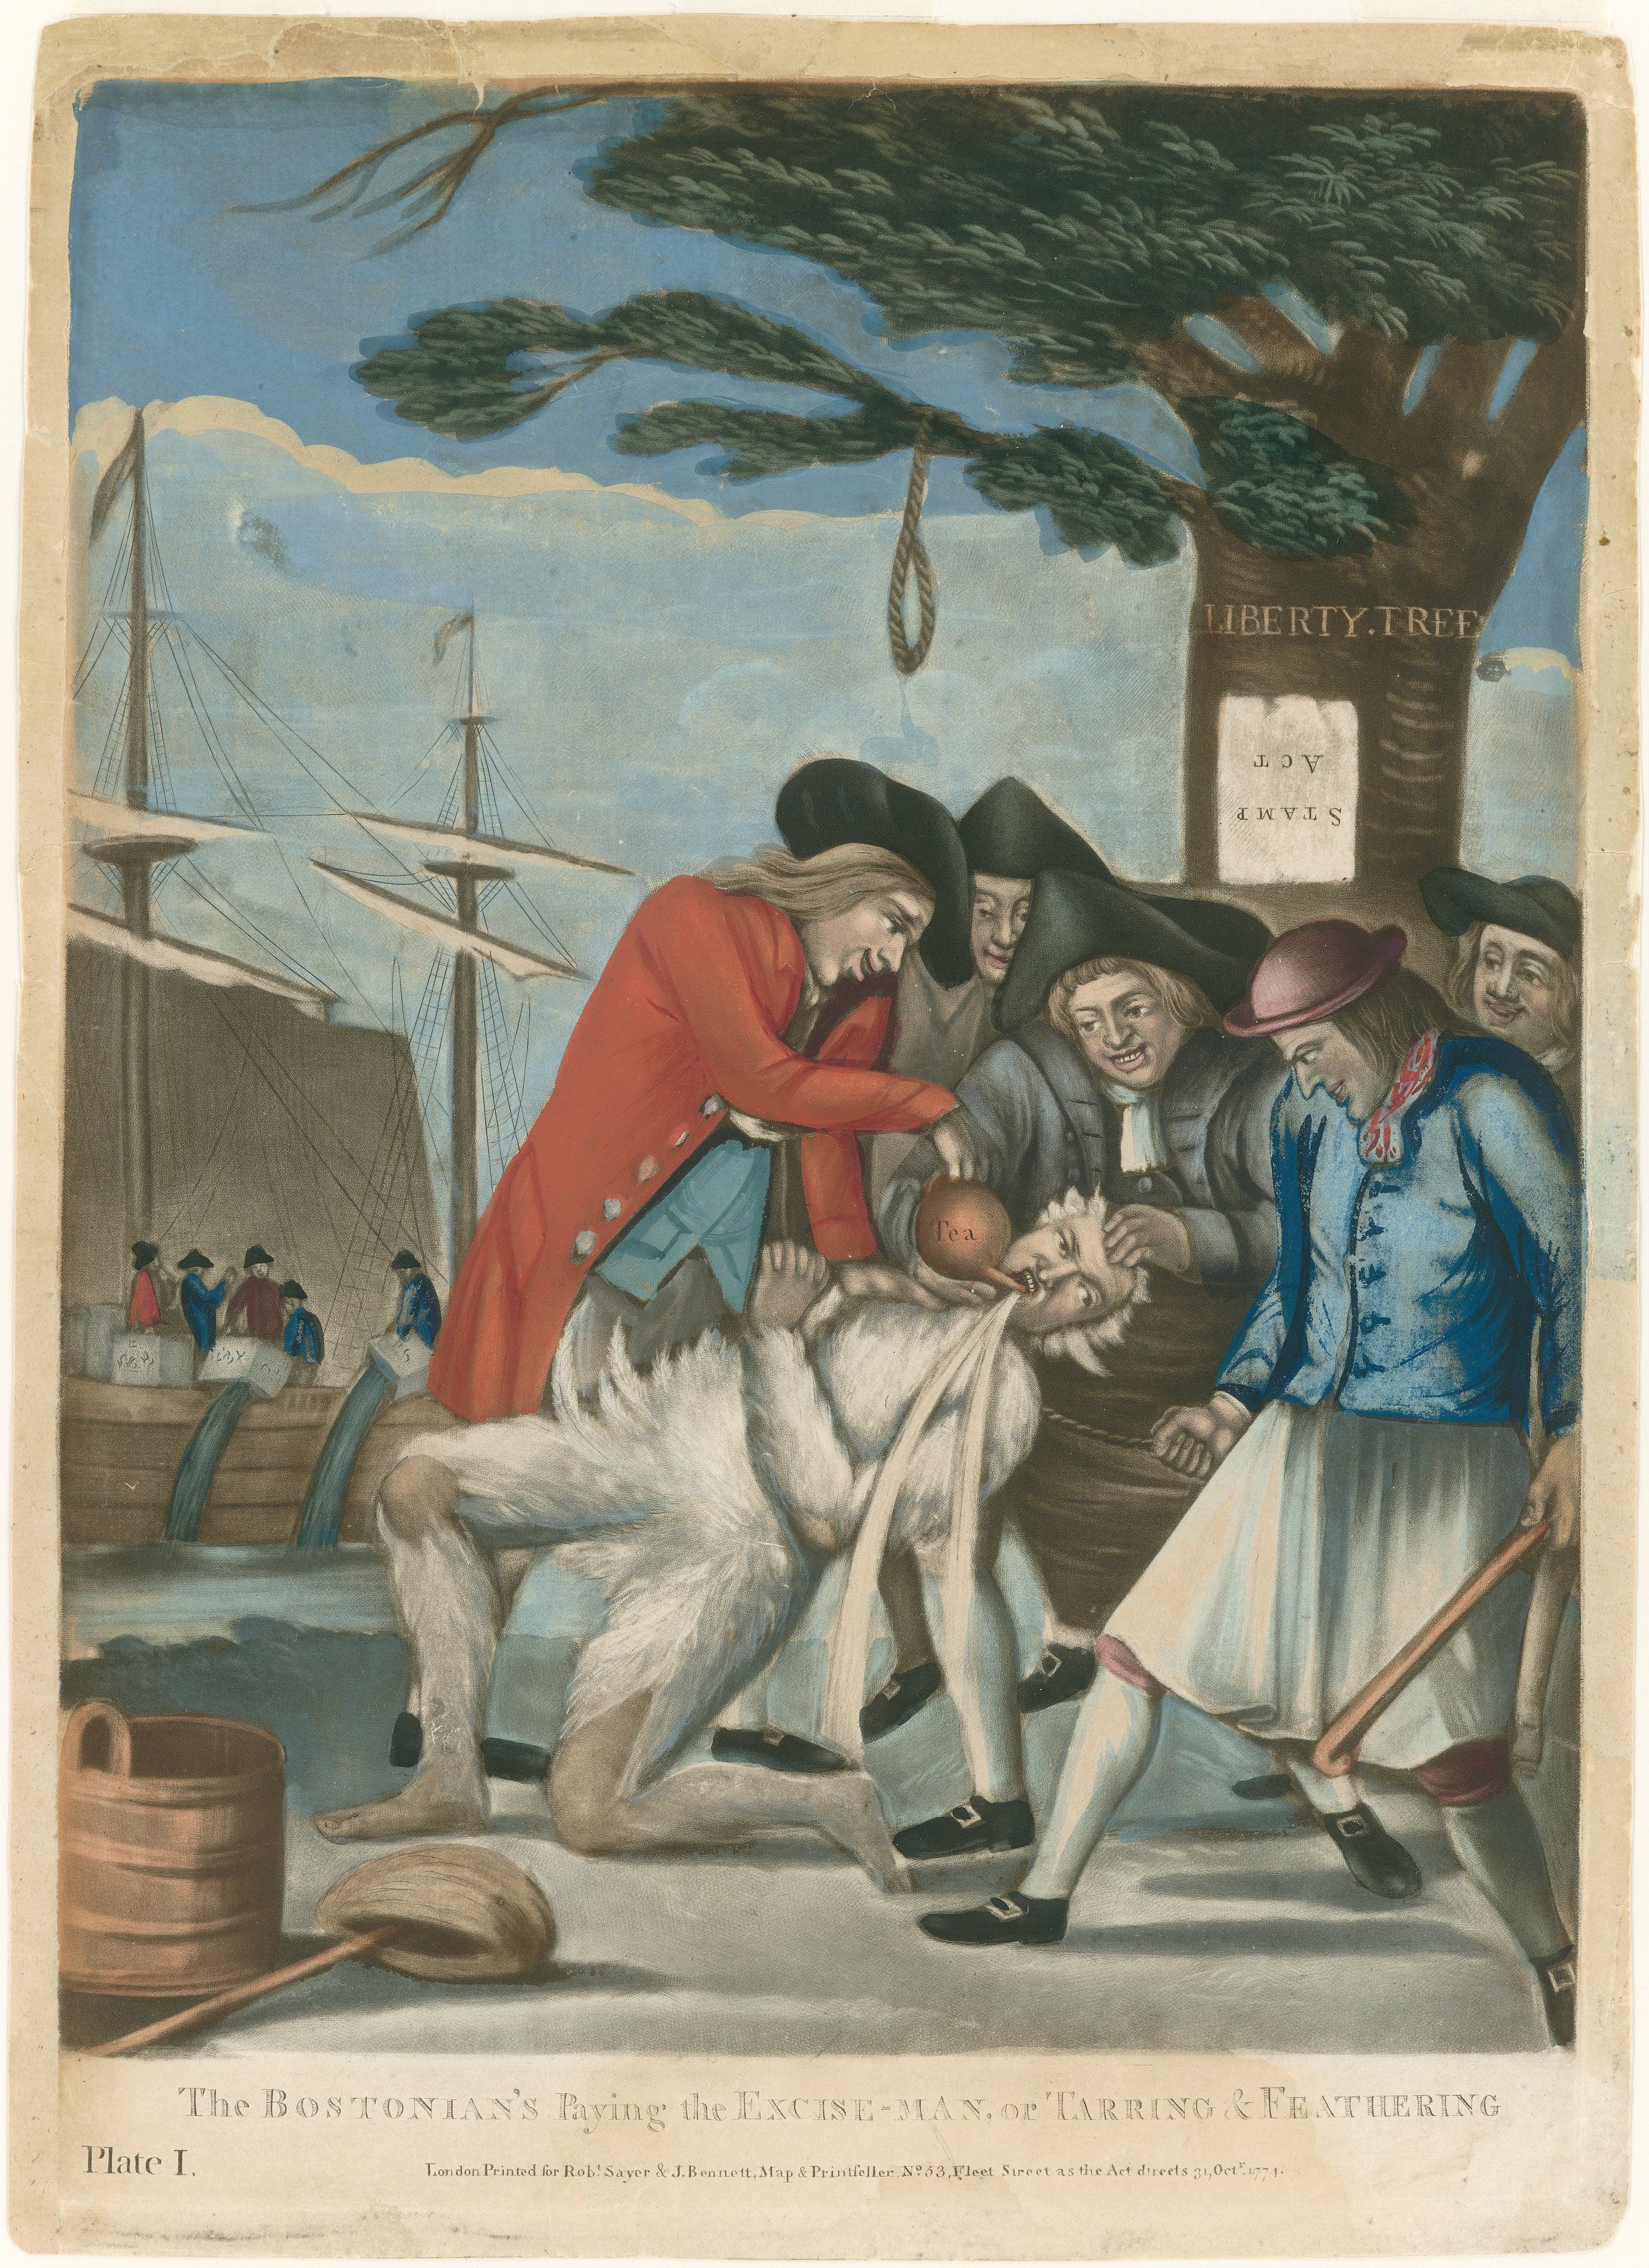 Philip_Dawe_%28attributed%29%2C_The_Bostonians_Paying_the_Excise-man%2C_or_Tarring_and_Feathering_%281774%29_-_02.jpg